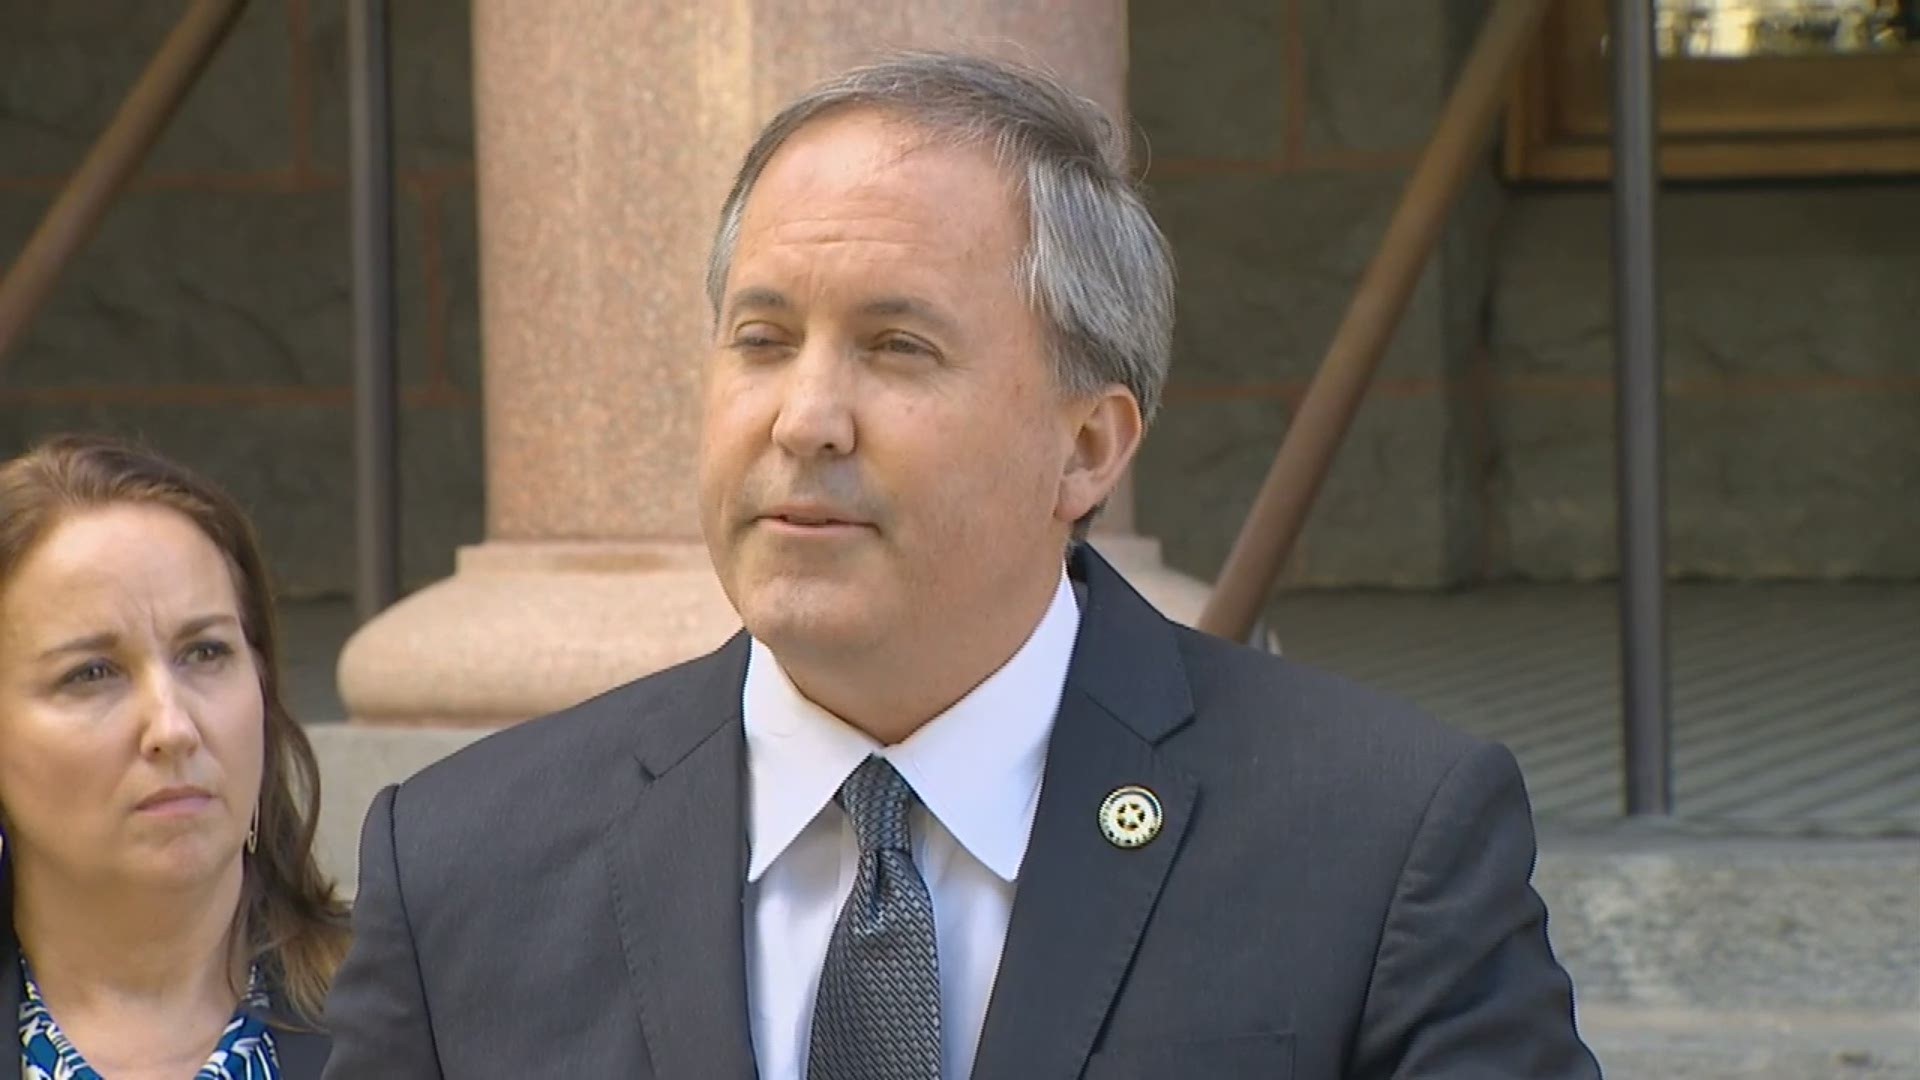 Ken Paxton discusses the arrest of Carl Ferrer, the CEO of an allege sex trafficking website based in Dallas.